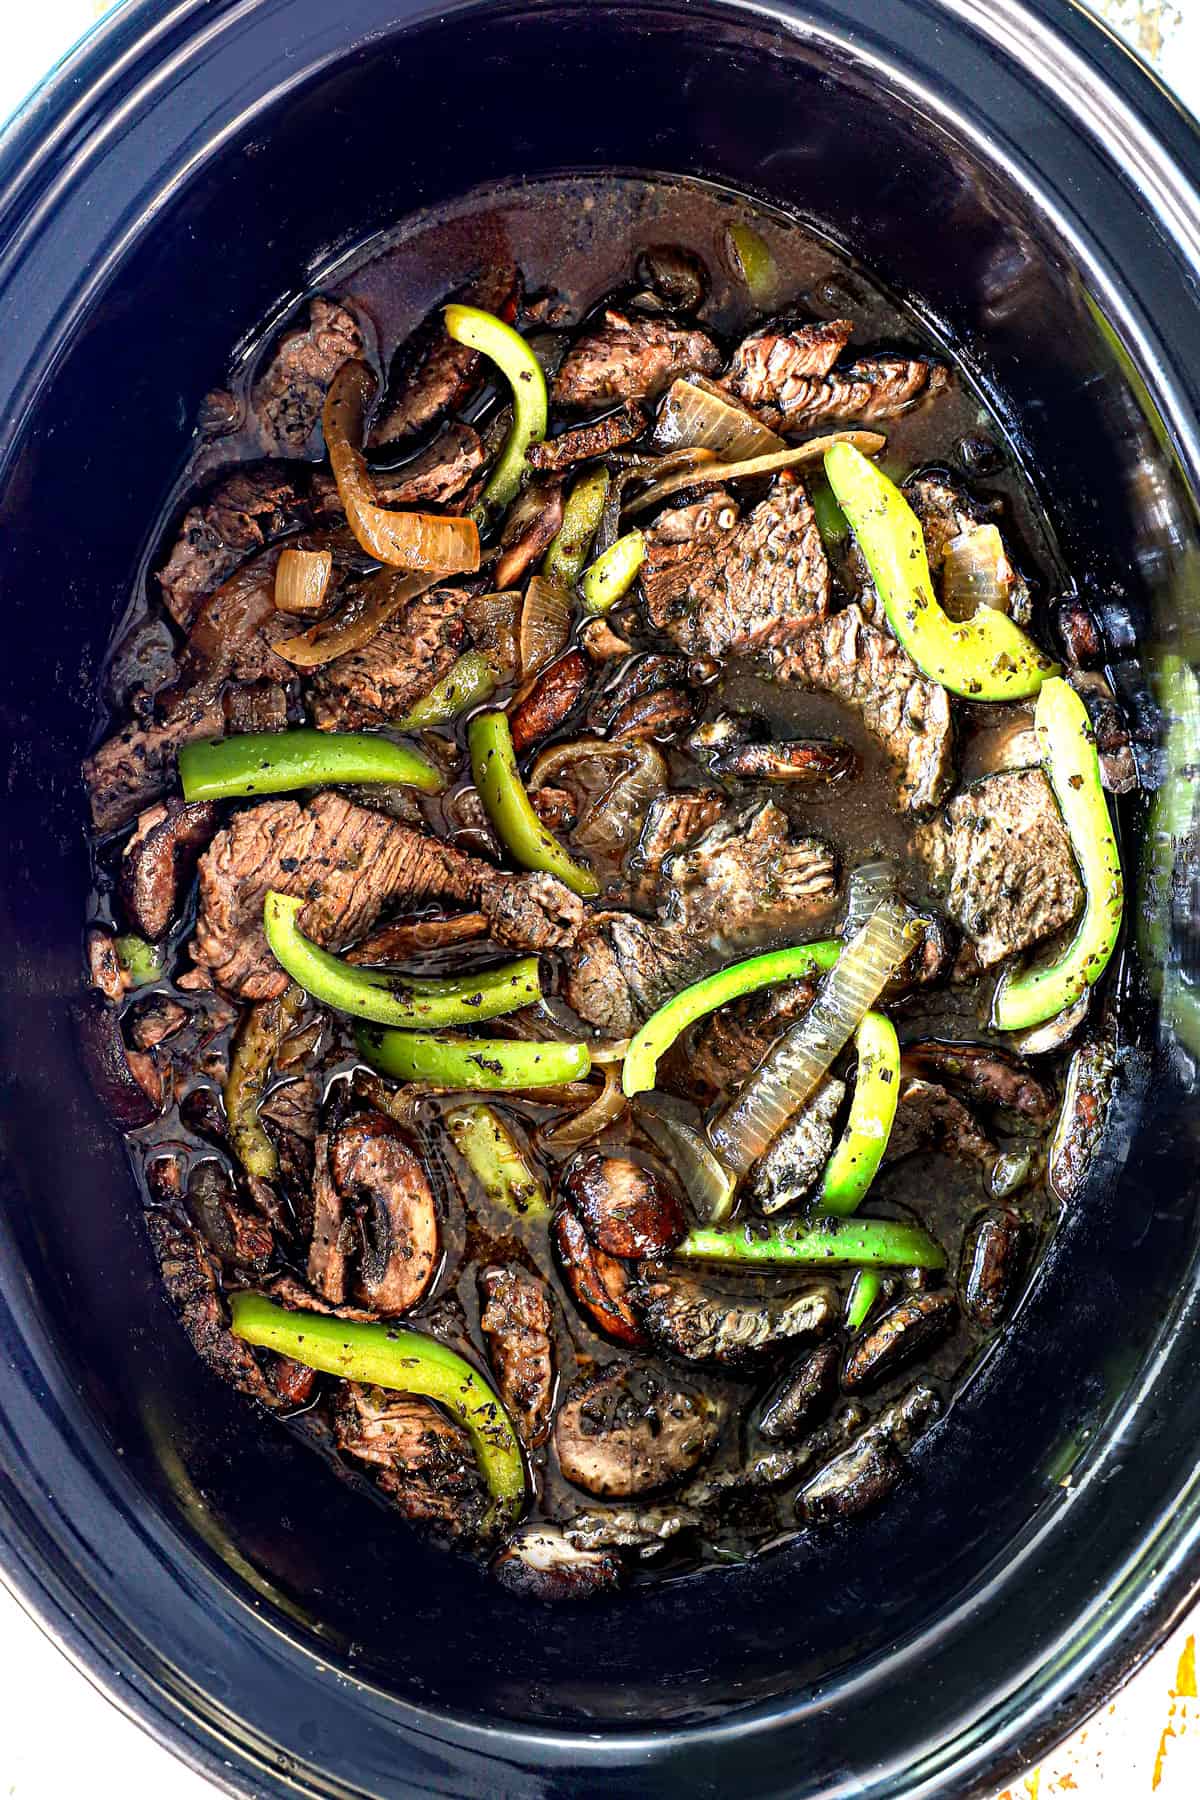 showing how to make Crockpot Philly Cheesesteak by cooking the steak, bell peppers, mushrooms and onions together